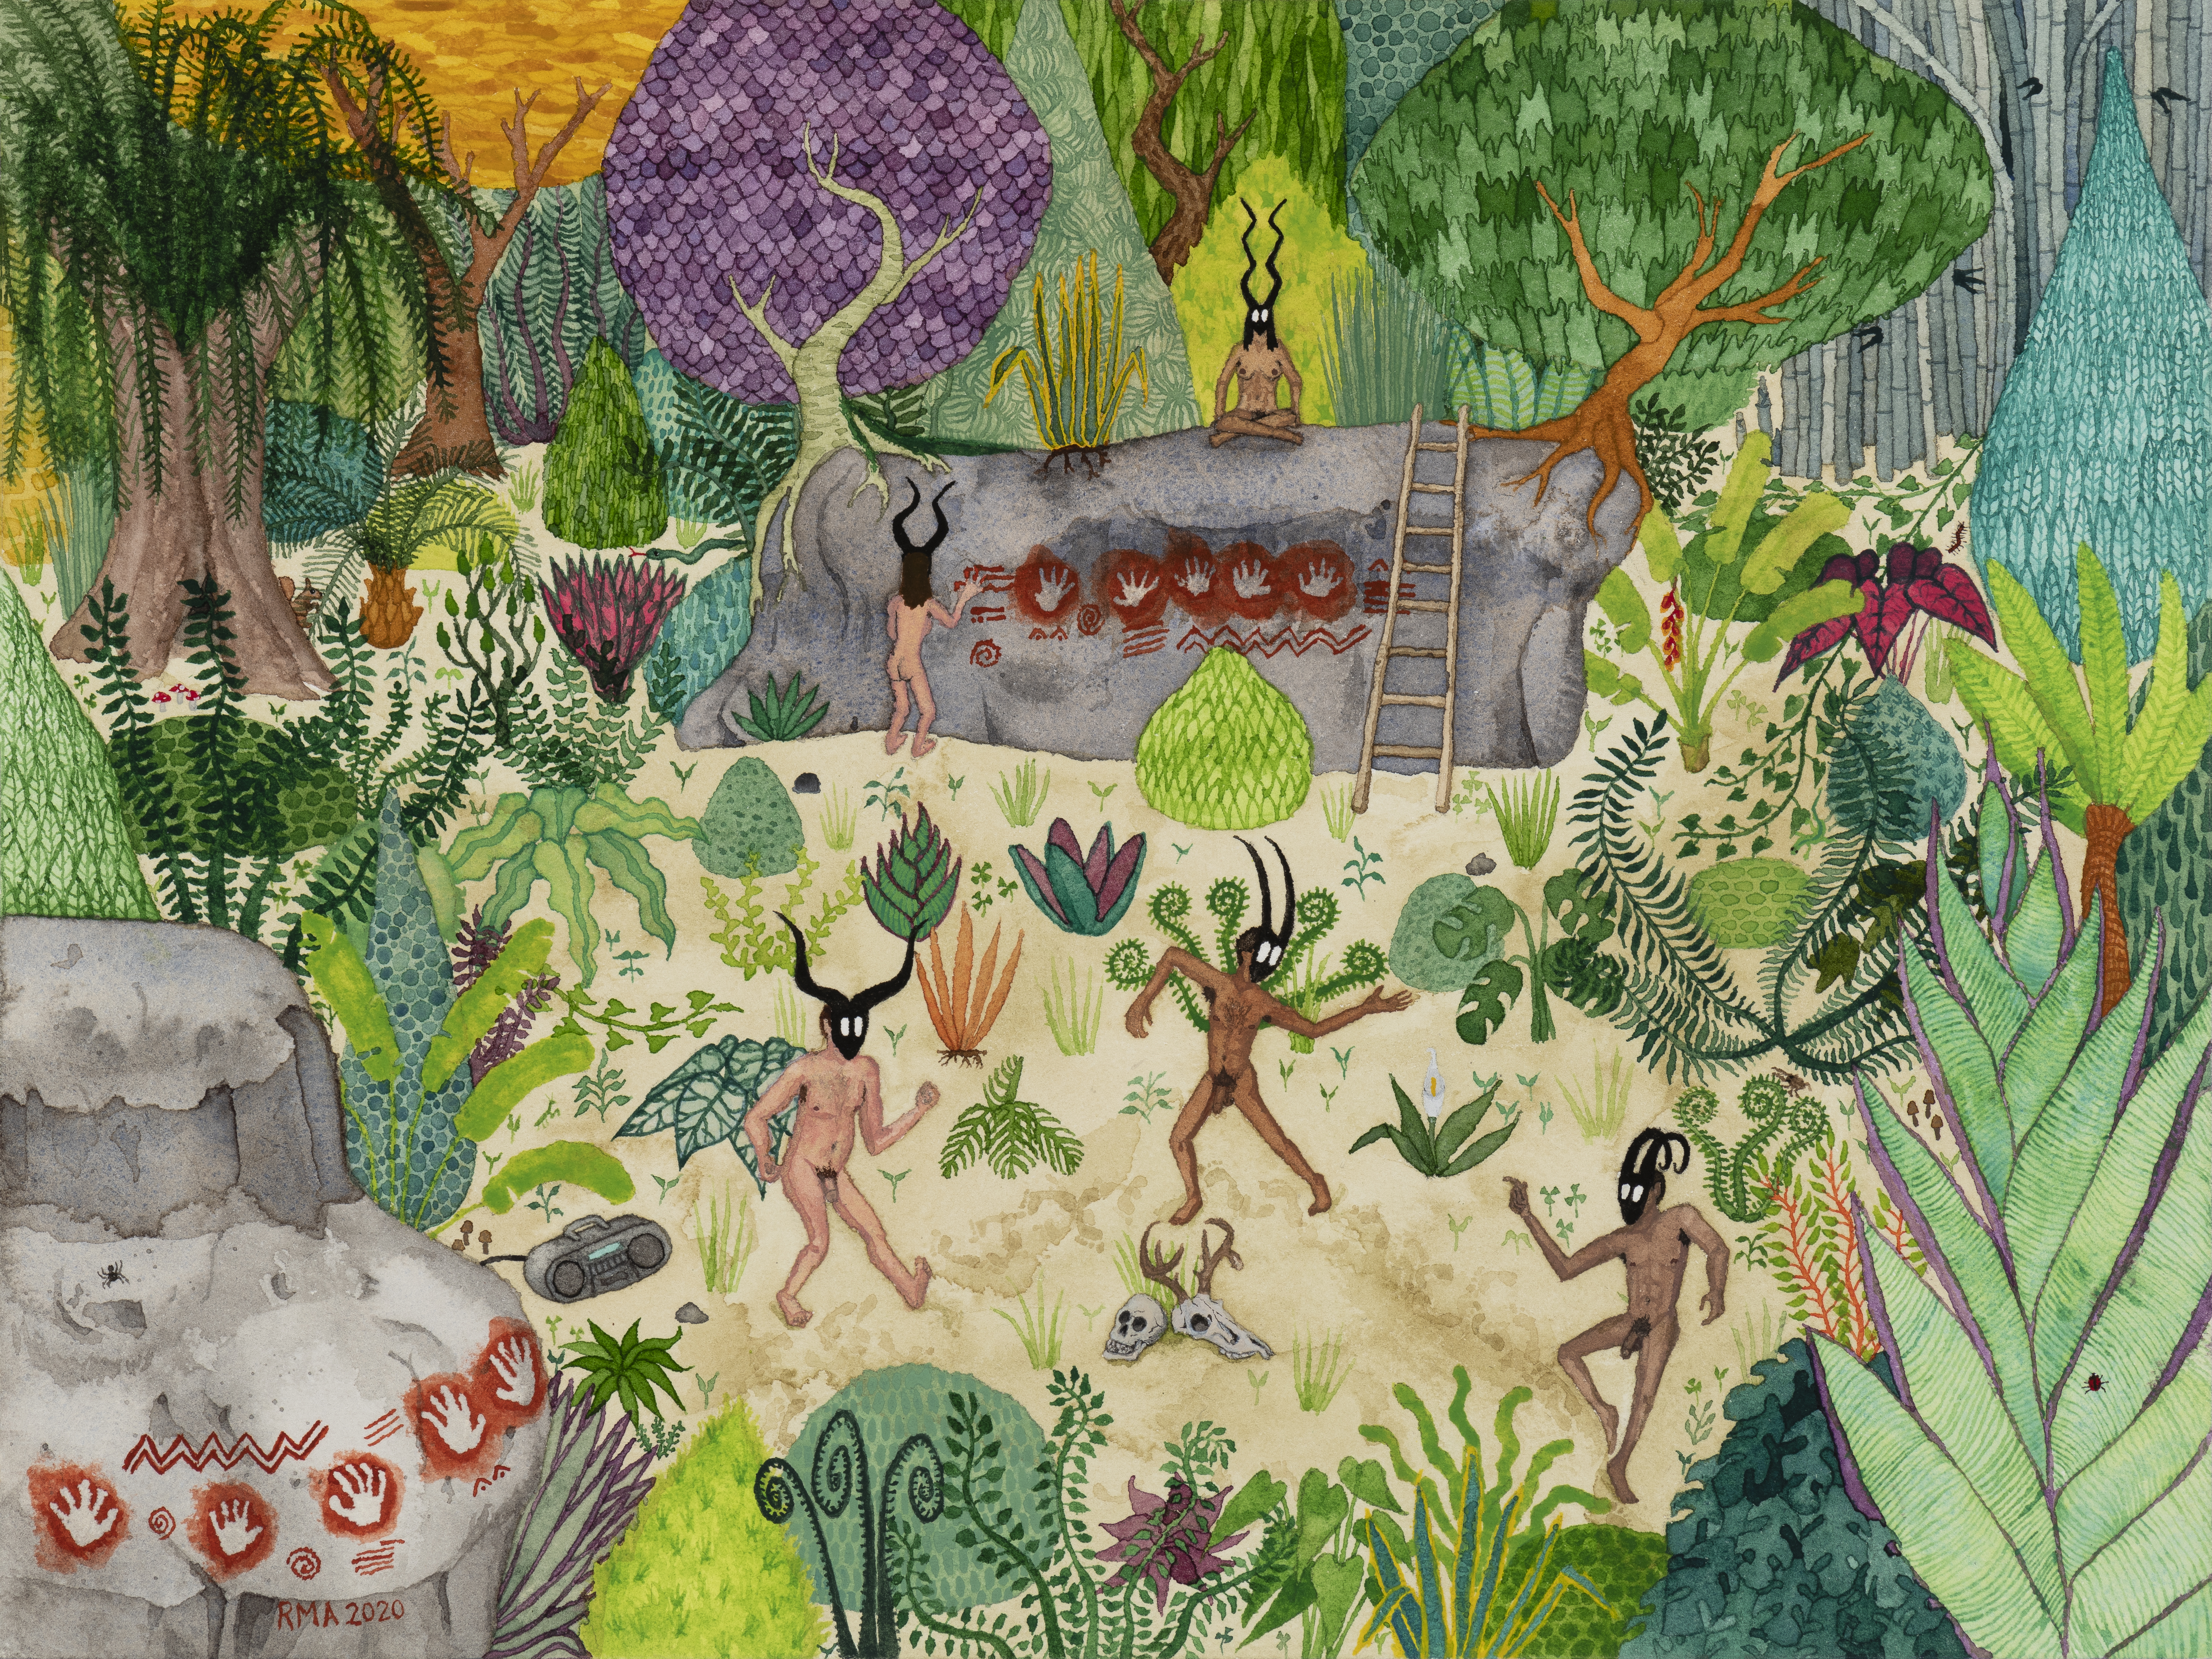 Masked figures dance around skulls in a jungle setting, while another creates cave paintings in the background